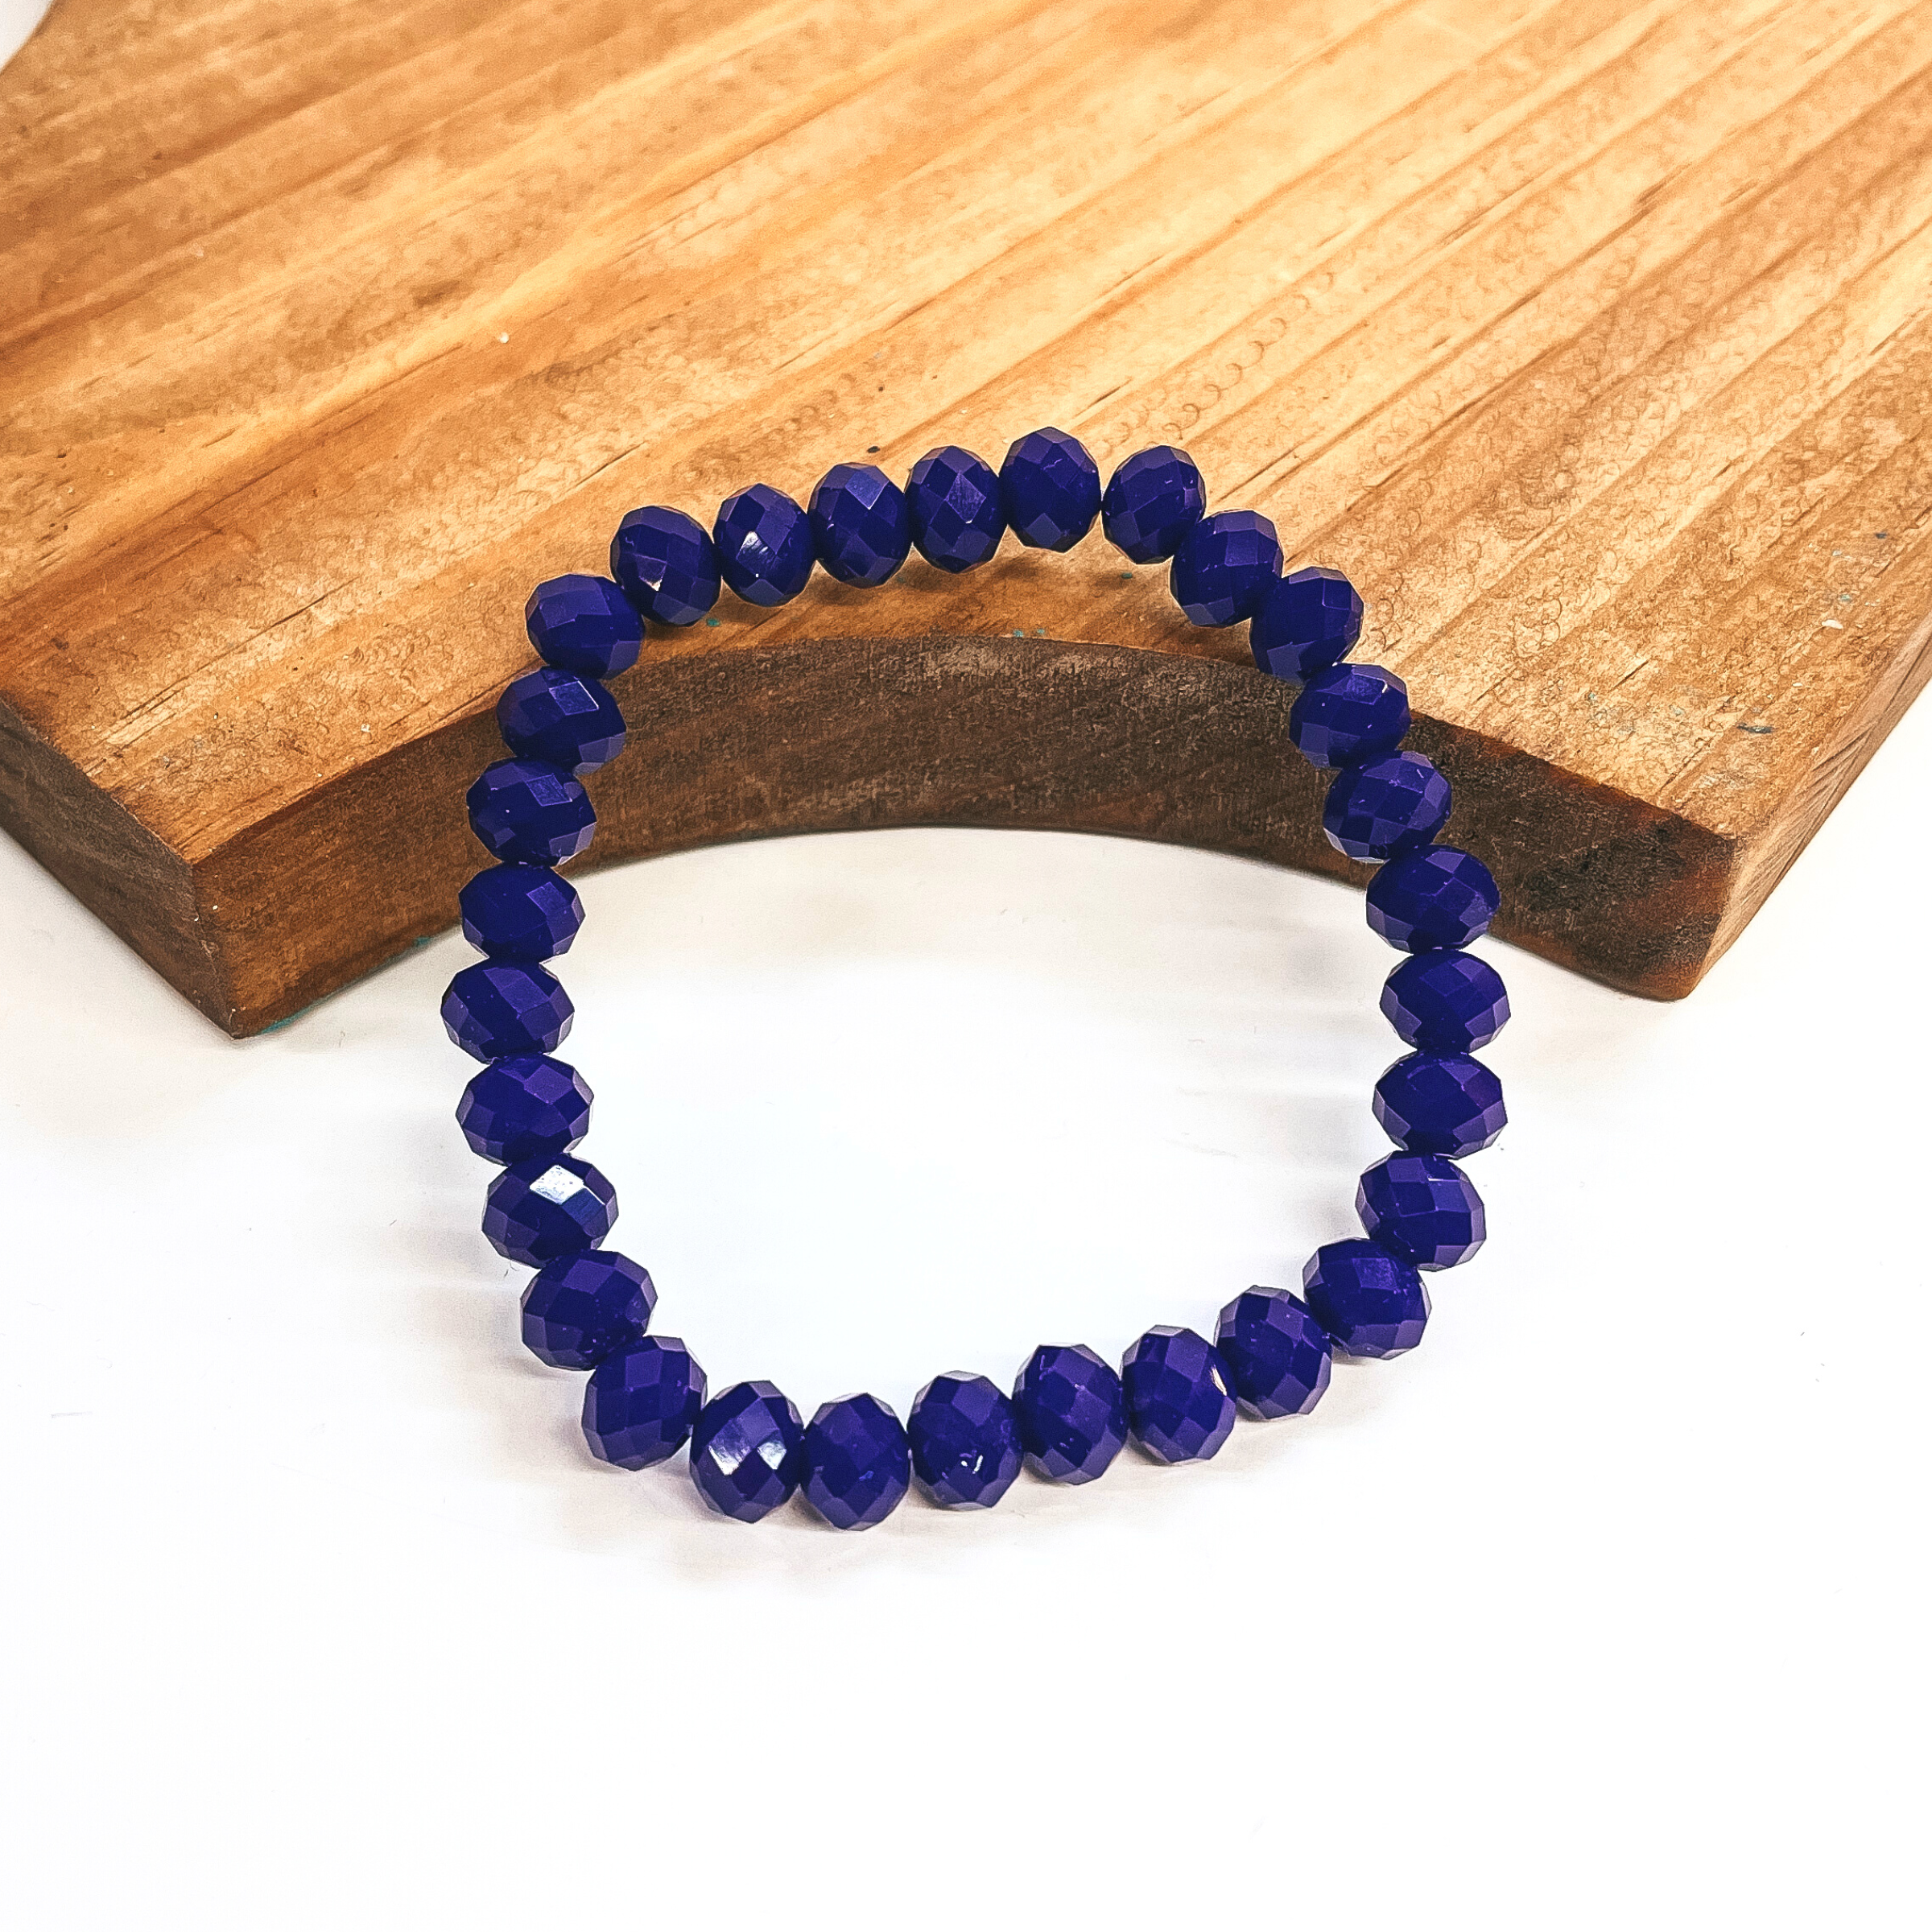 Buy 3 for $10 | Crystal Beaded Stacker Bracelet in Royal Blue - Giddy Up Glamour Boutique